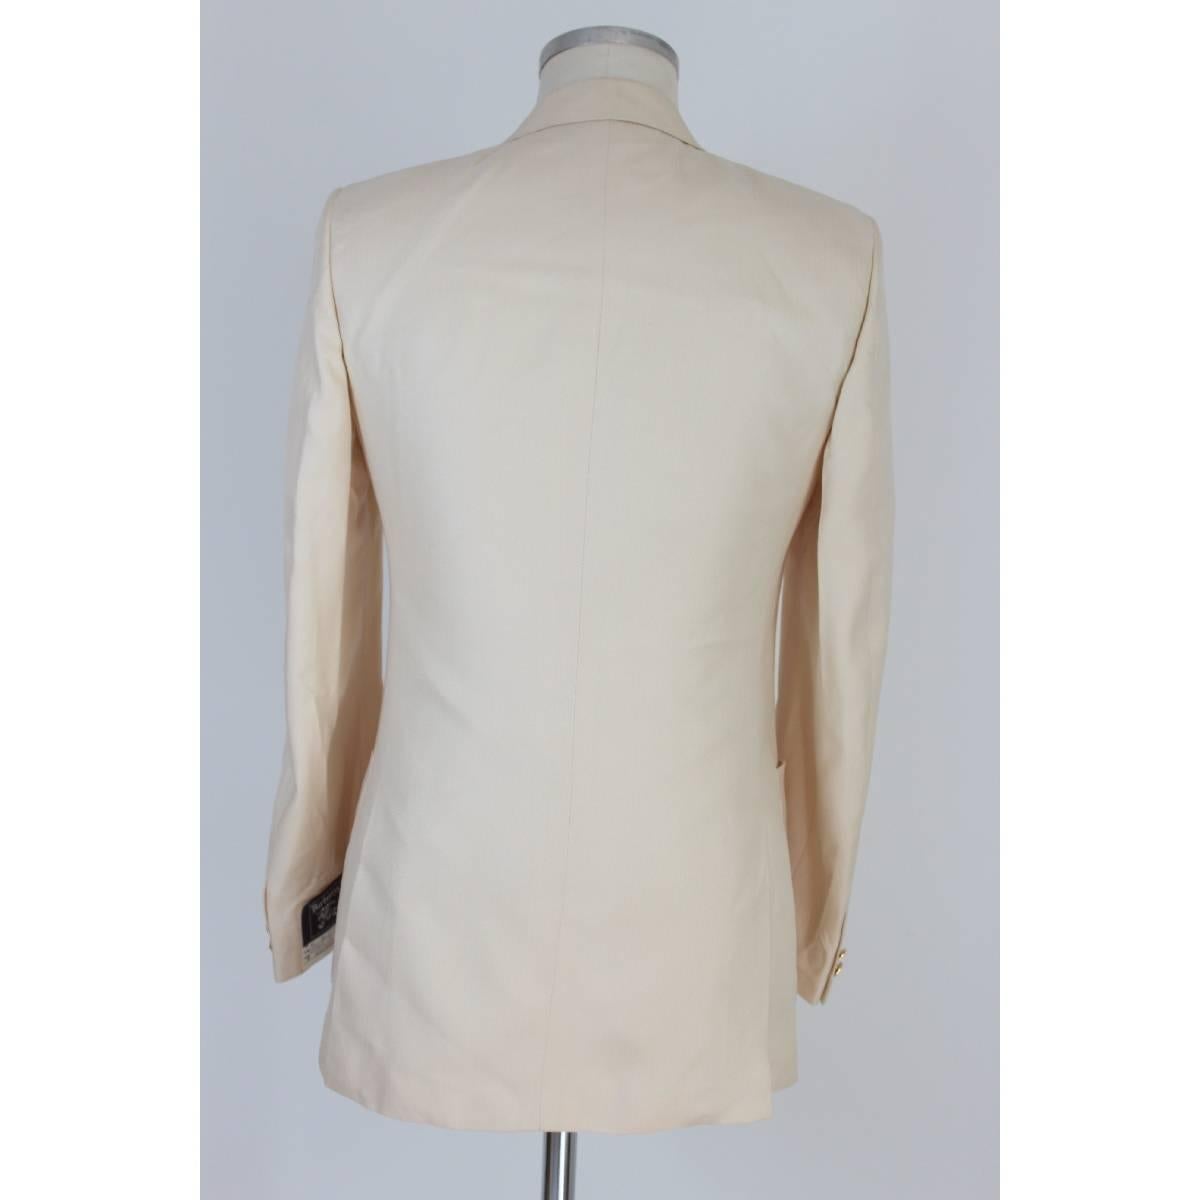 Burberry’s men’s vintage jacket double breasted model Burlington. Beige colour. Jacket in 100% silk, lining inside 100% cupro. The jacket has gold buttons with logo print. New with tag. Made United Kingdom.

Size 46 En 36 Us 36 Uk

Shoulder: 46